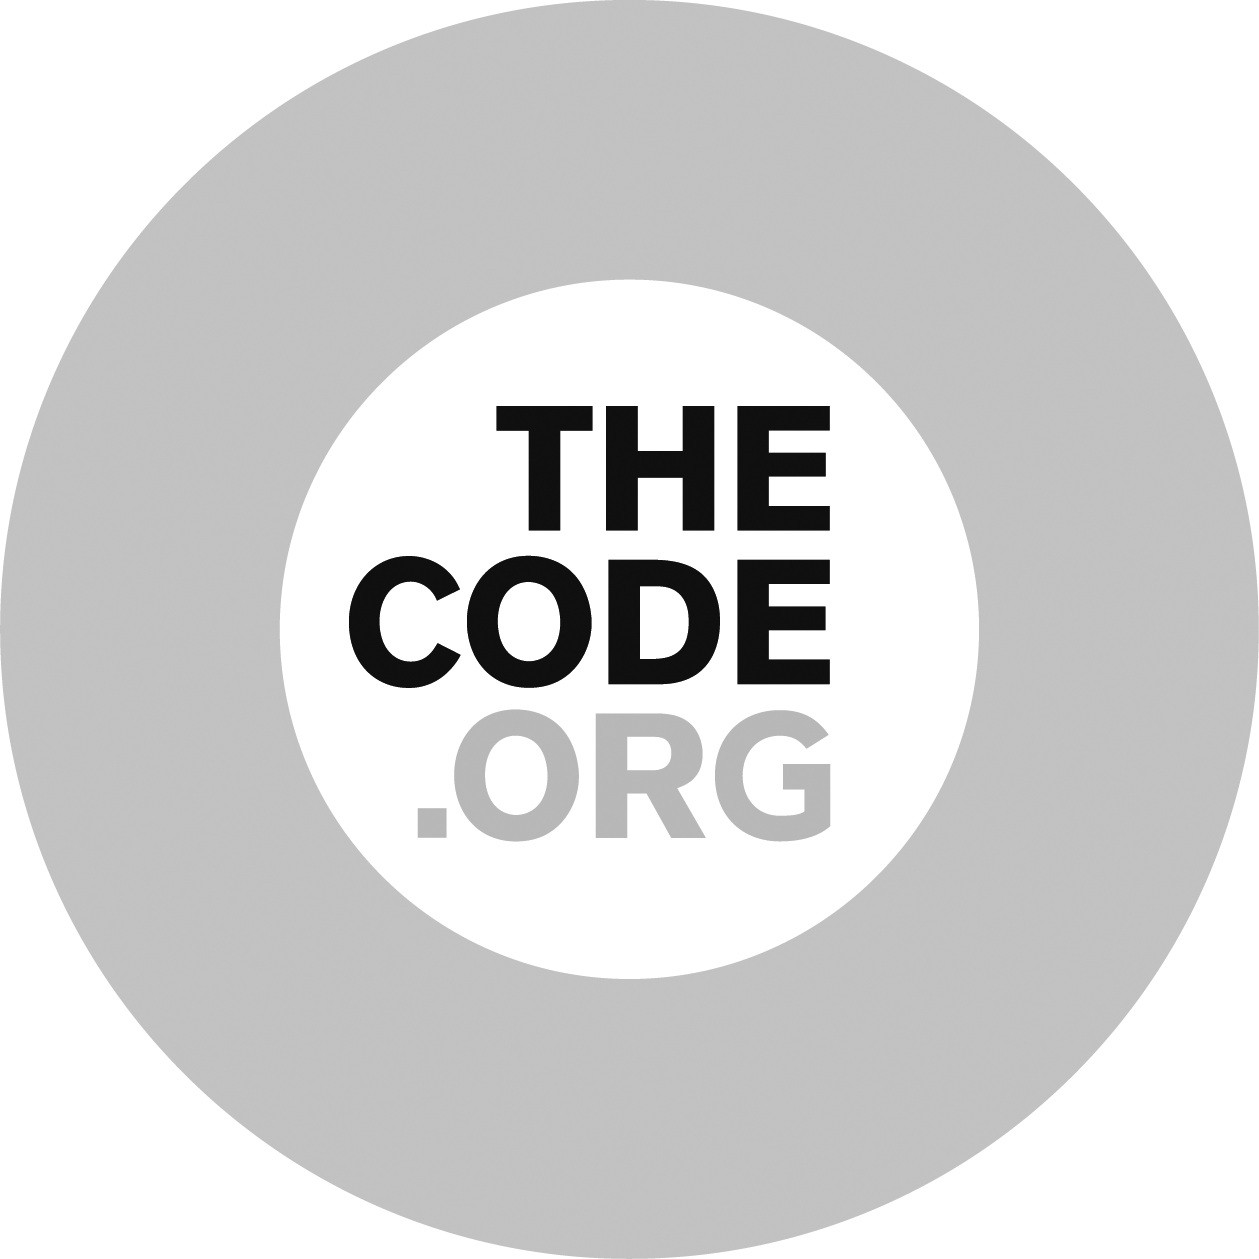 TheCode.org